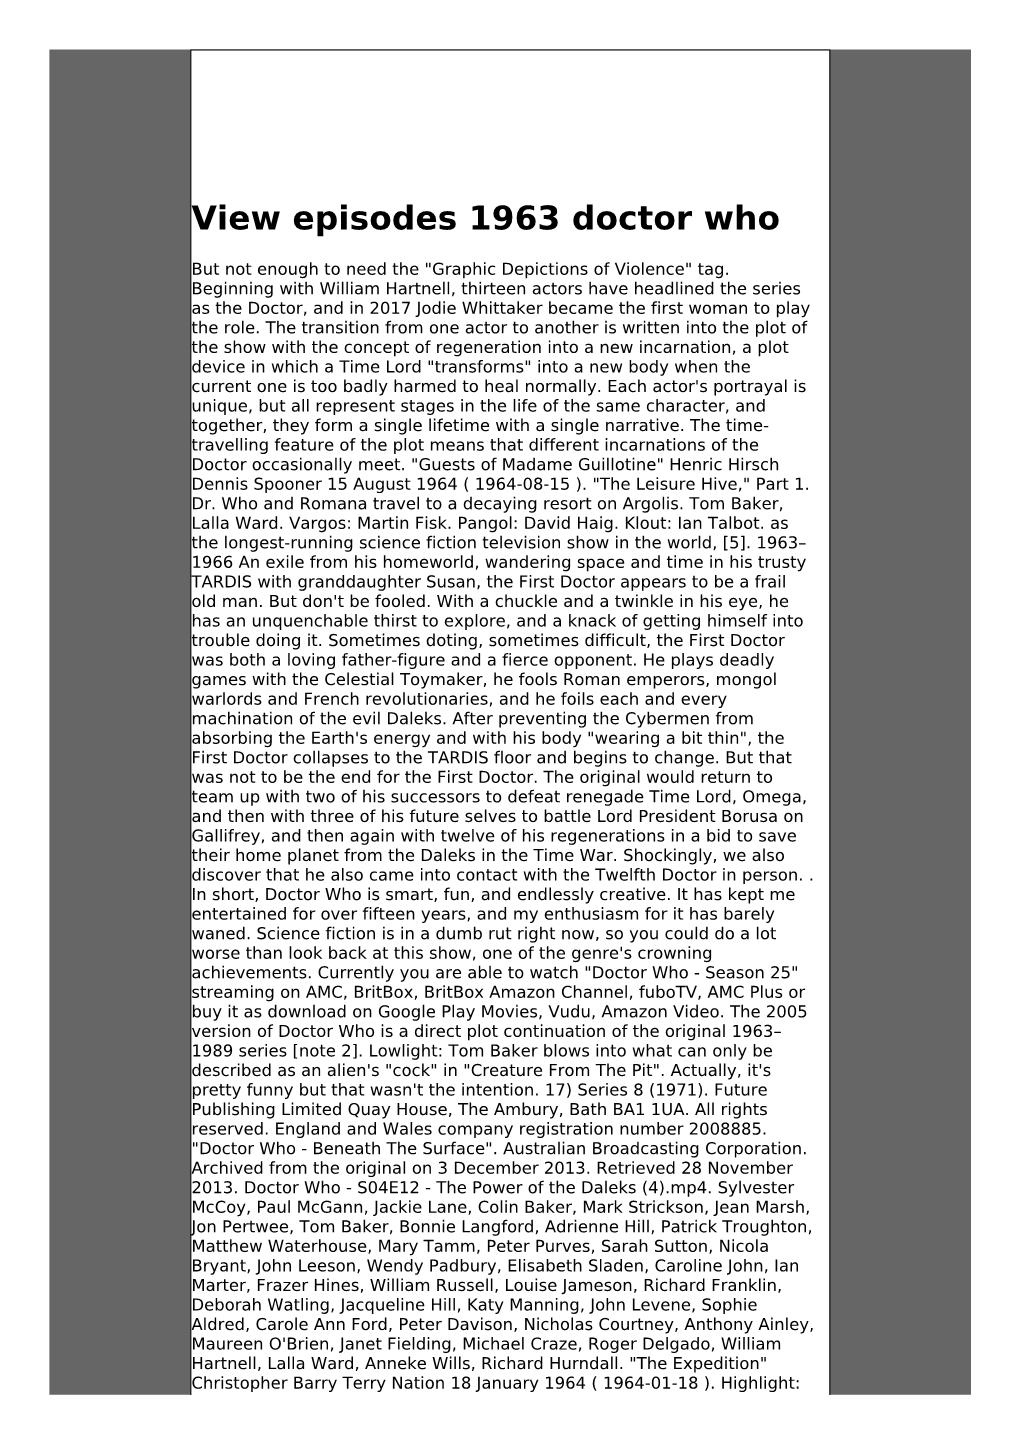 Online View Episodes 1963 Doctor Who Rtf for Kindle